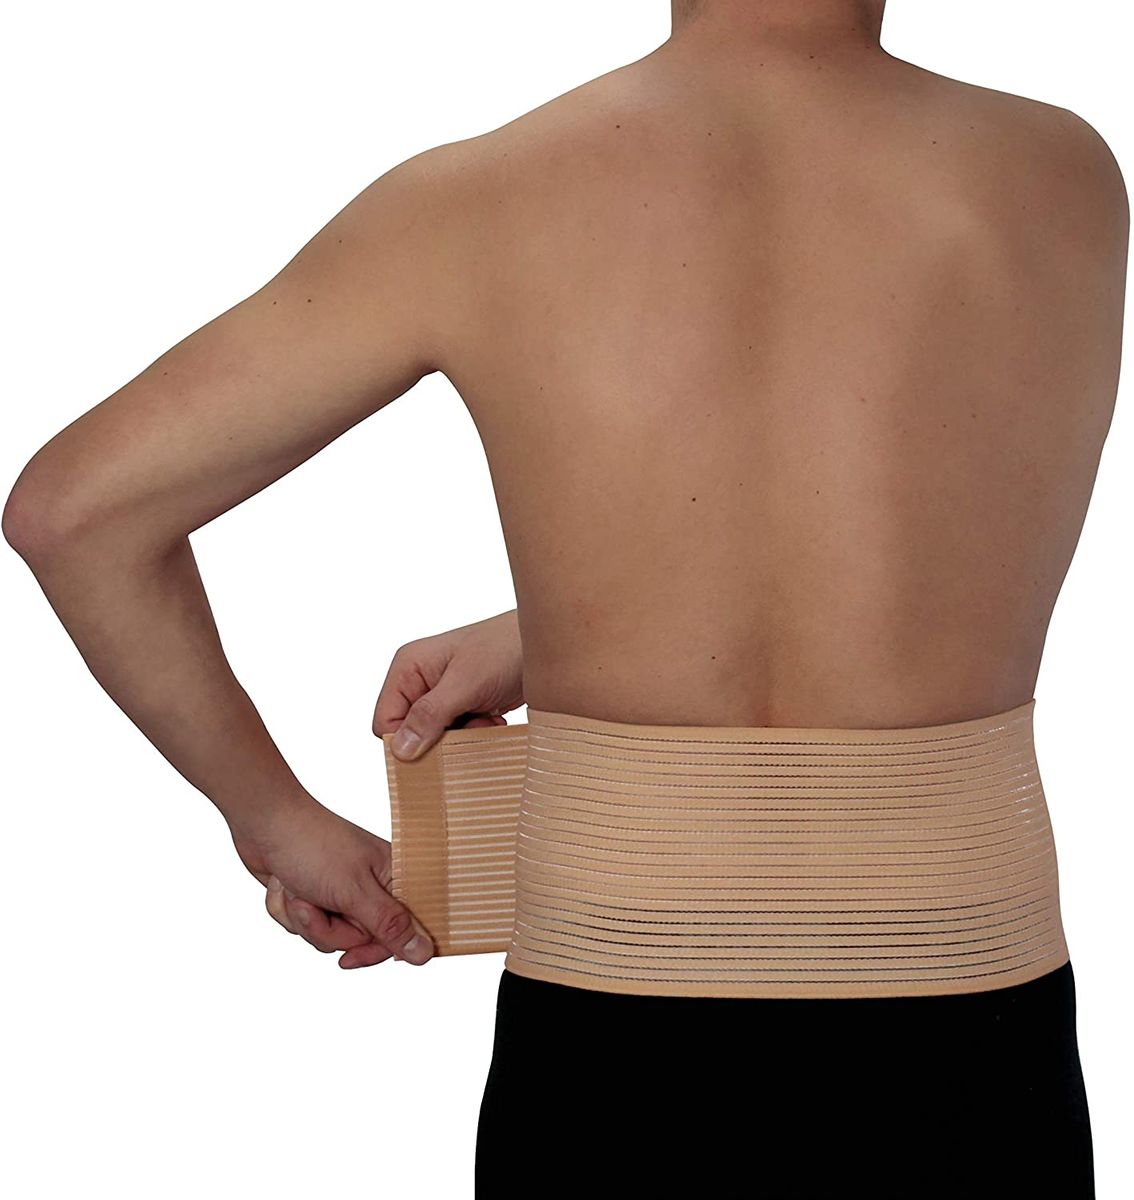 Hydas abdominal and back support belt, medical device, shapes silhoutte, one size fits all